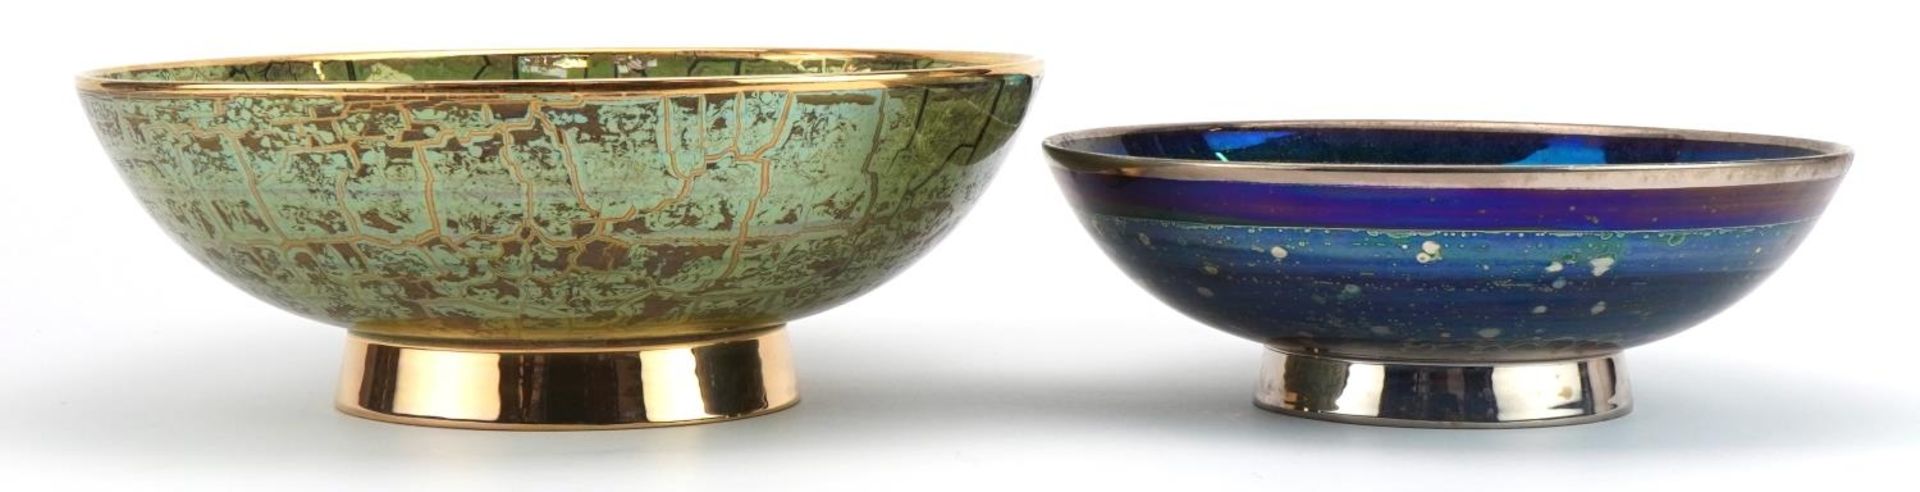 Atkinson Jones, two contemporary lustreware footed bowls including one having a green crackle glaze, - Image 2 of 5